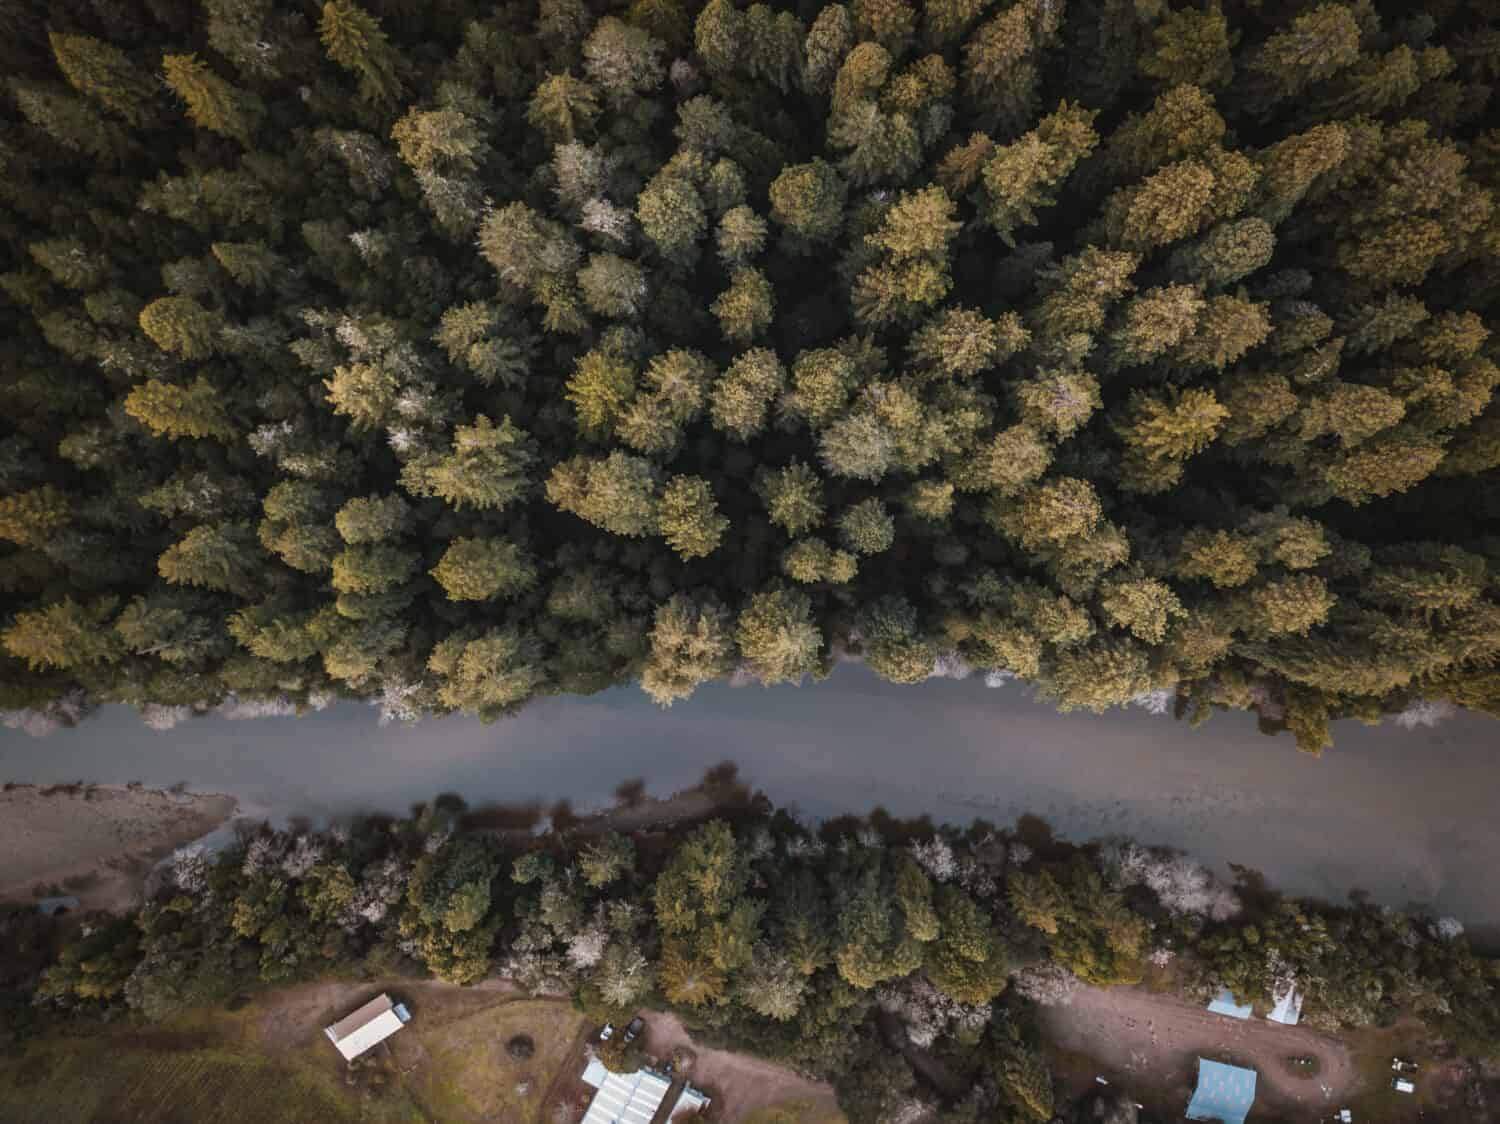 Drone photograph looking down on trees in a forest. Taken at the edge of Hendy Woods State Park in Northern California.